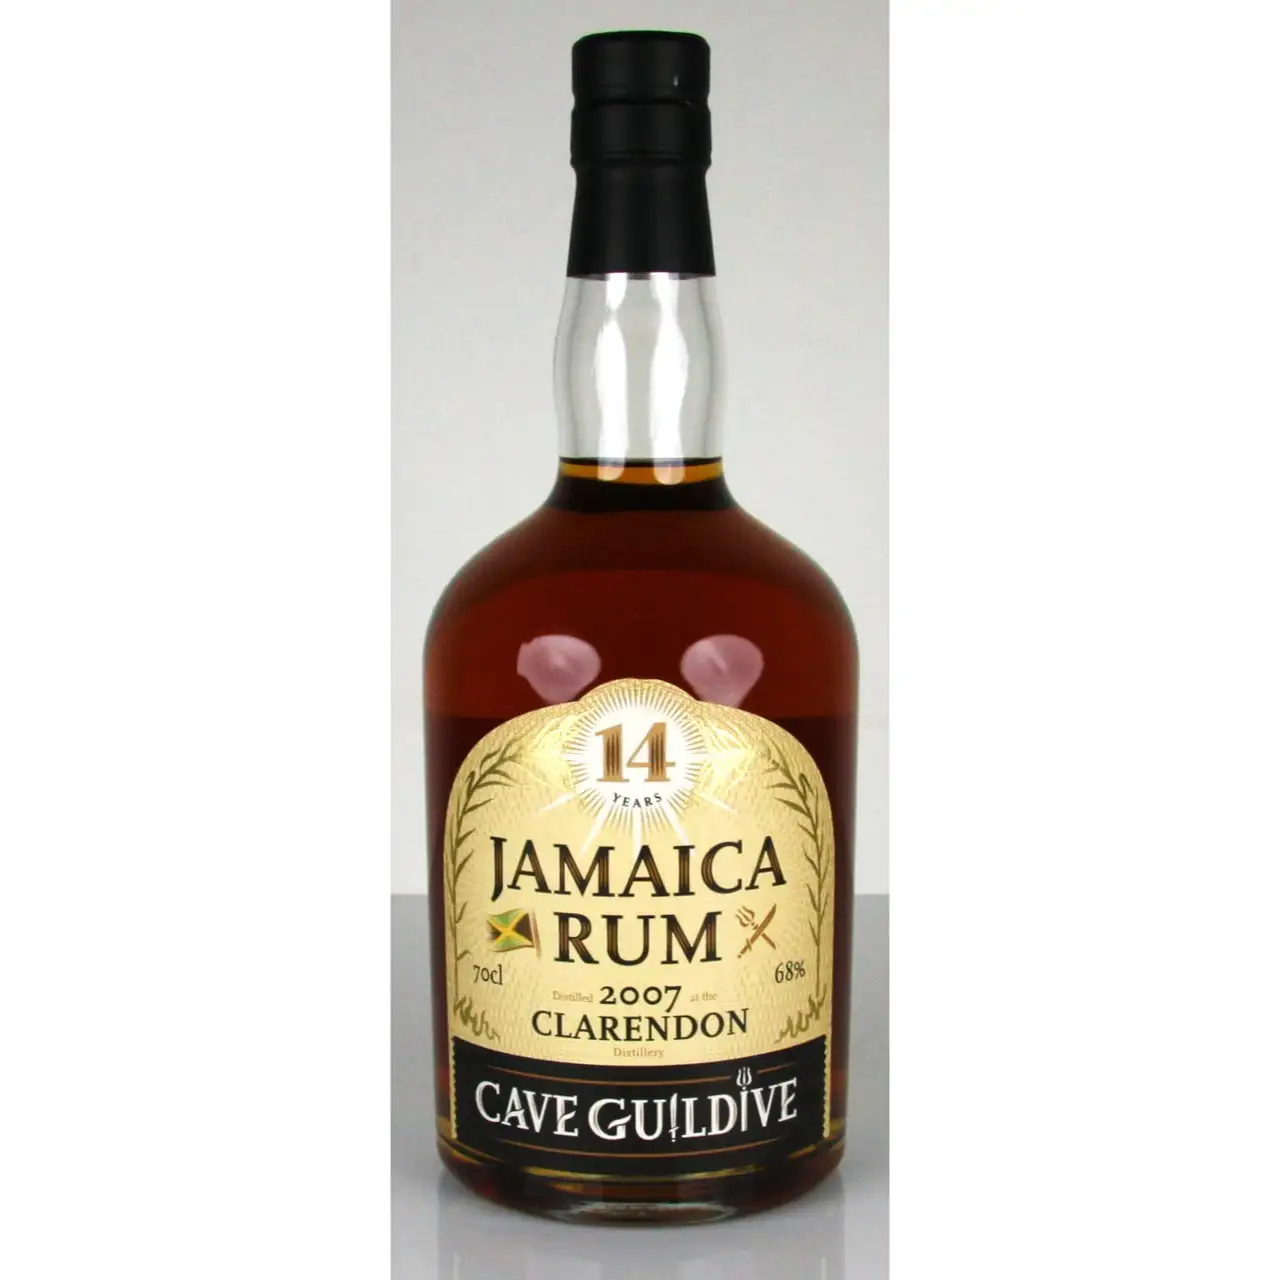 Image of the front of the bottle of the rum Jamaica Rum (Clarendon)